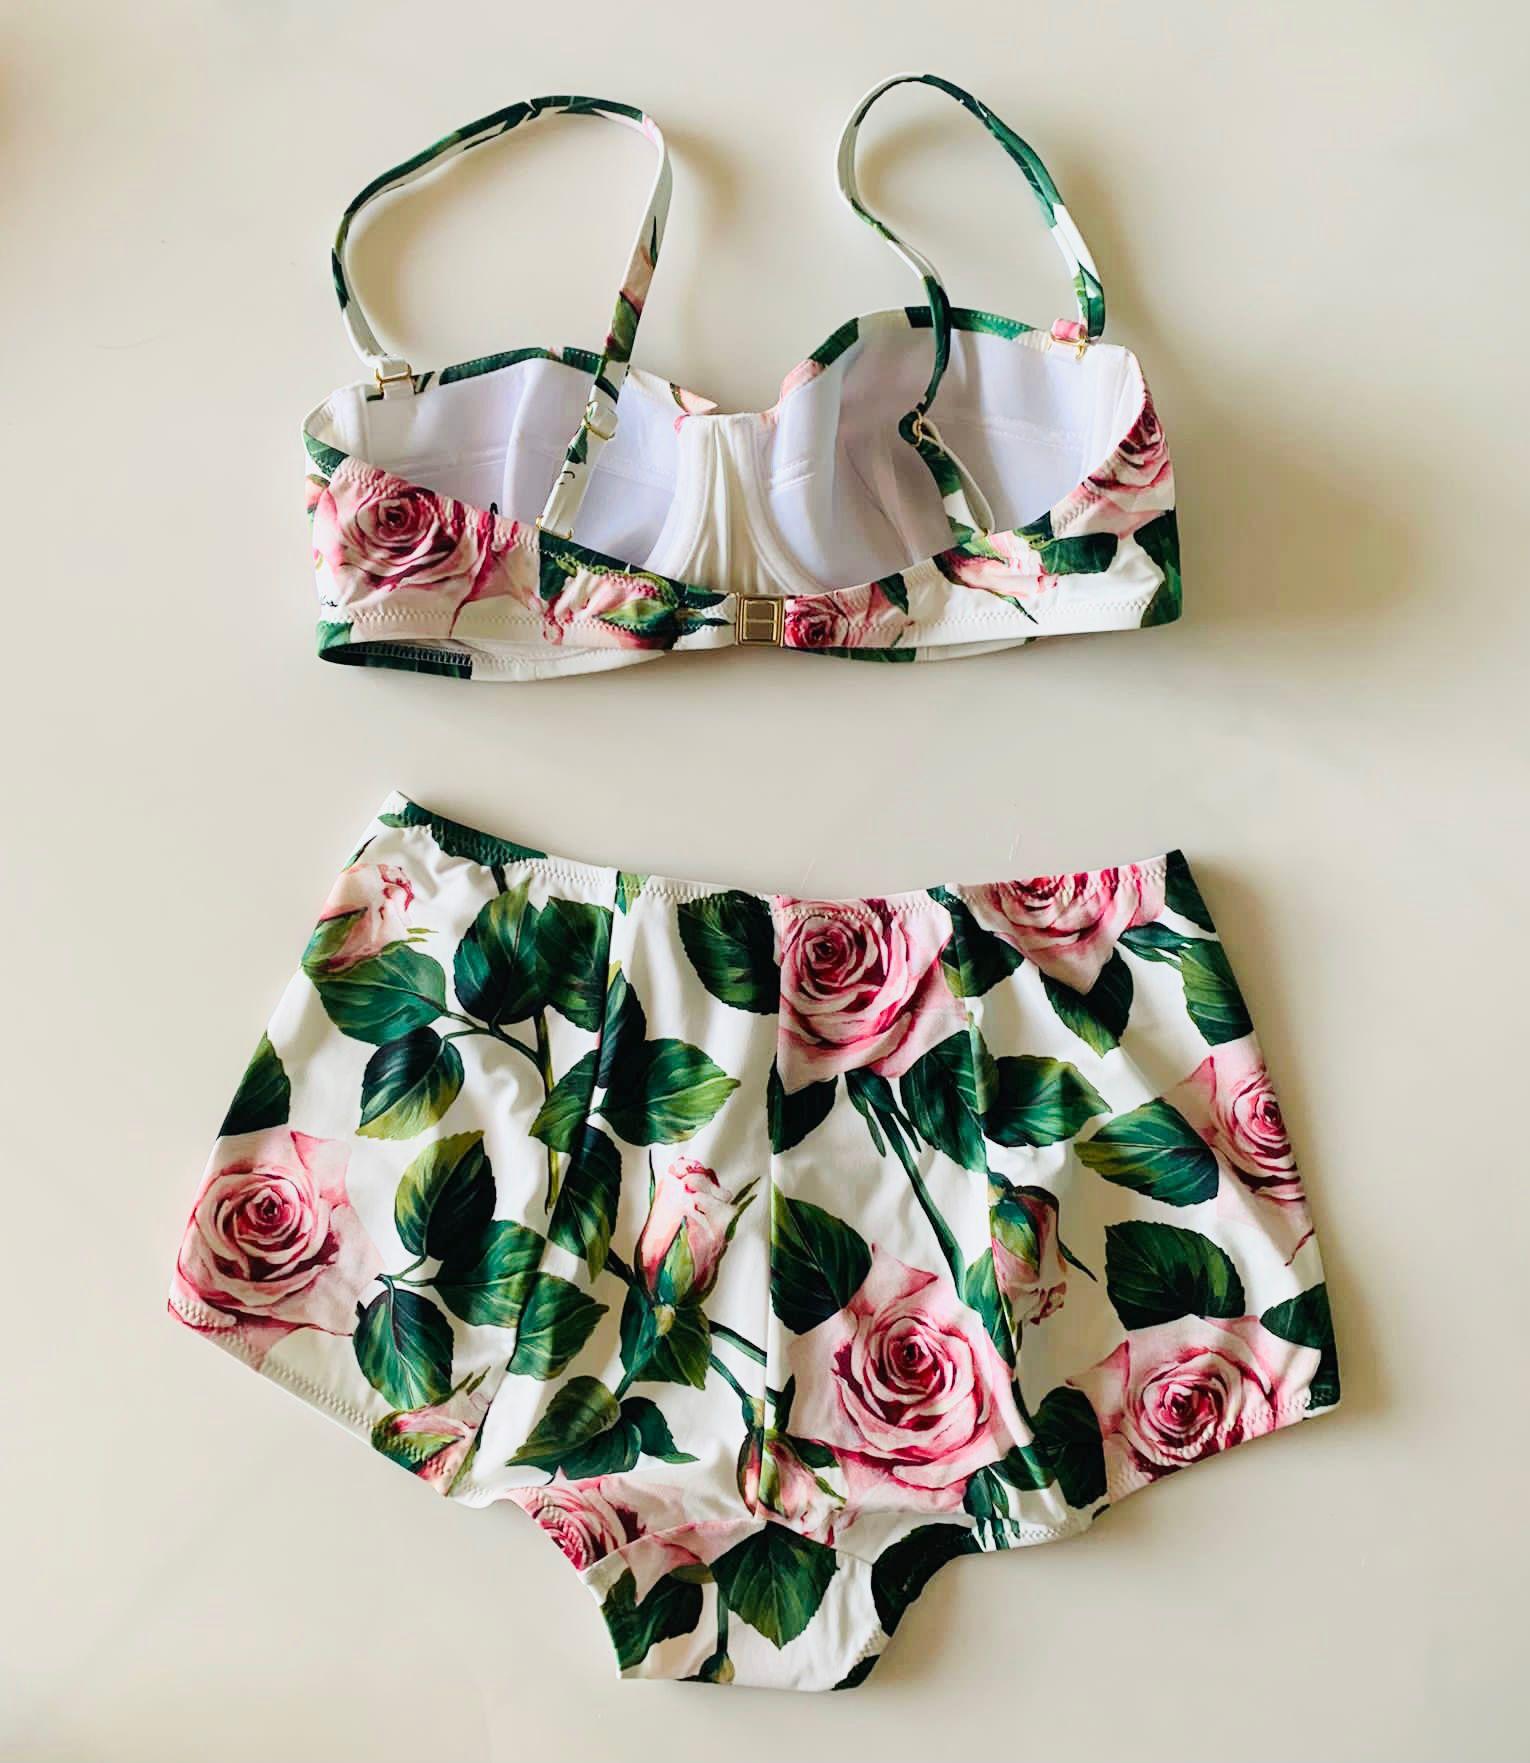 Dolce & Gabbana romantic built-in balcony bra bikini top offers a sophisticated look thanks to the TROPICAL ROSE print and is made of the precious “sensitive fabric”. The shaped cups guarantee structure and support. 
The bikini bottom with high